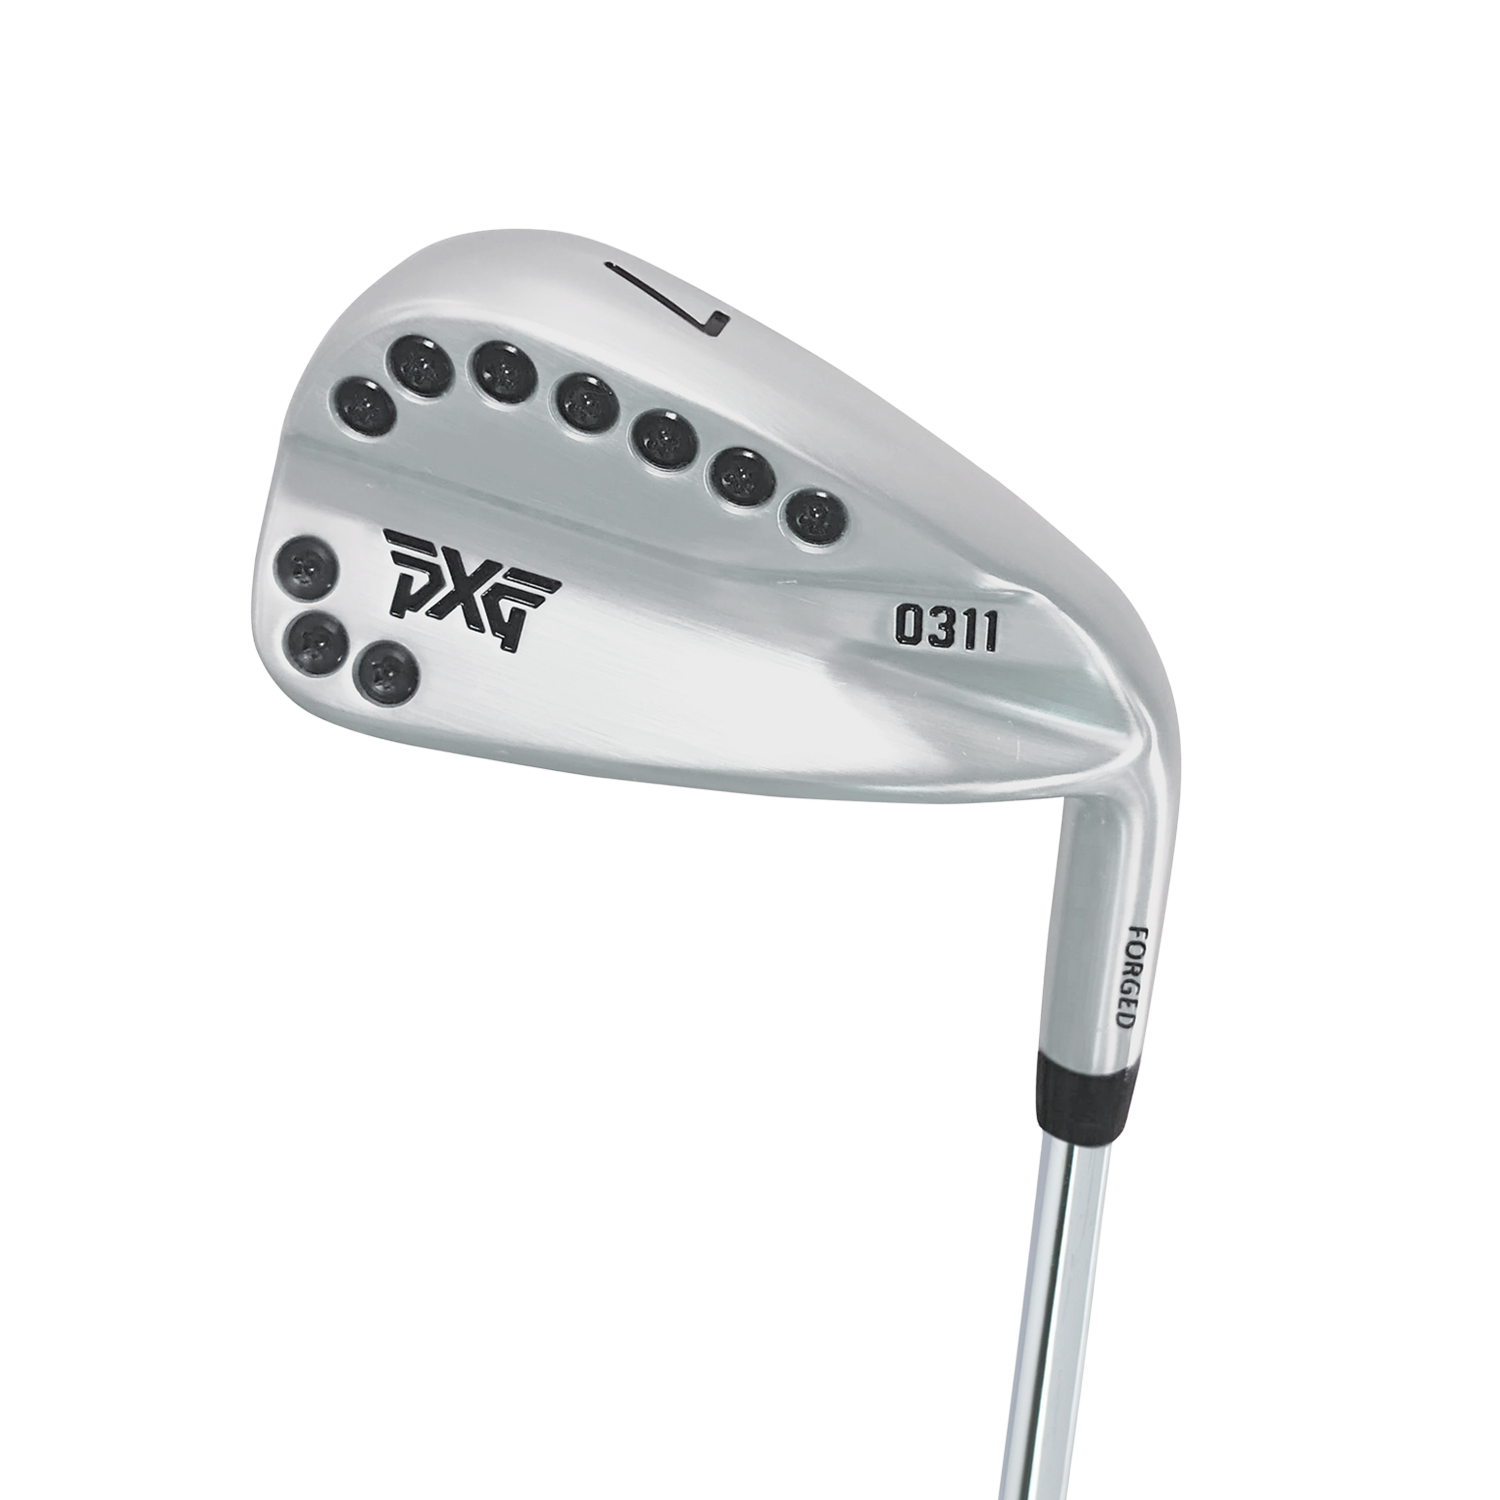 Pxg Military Pricing